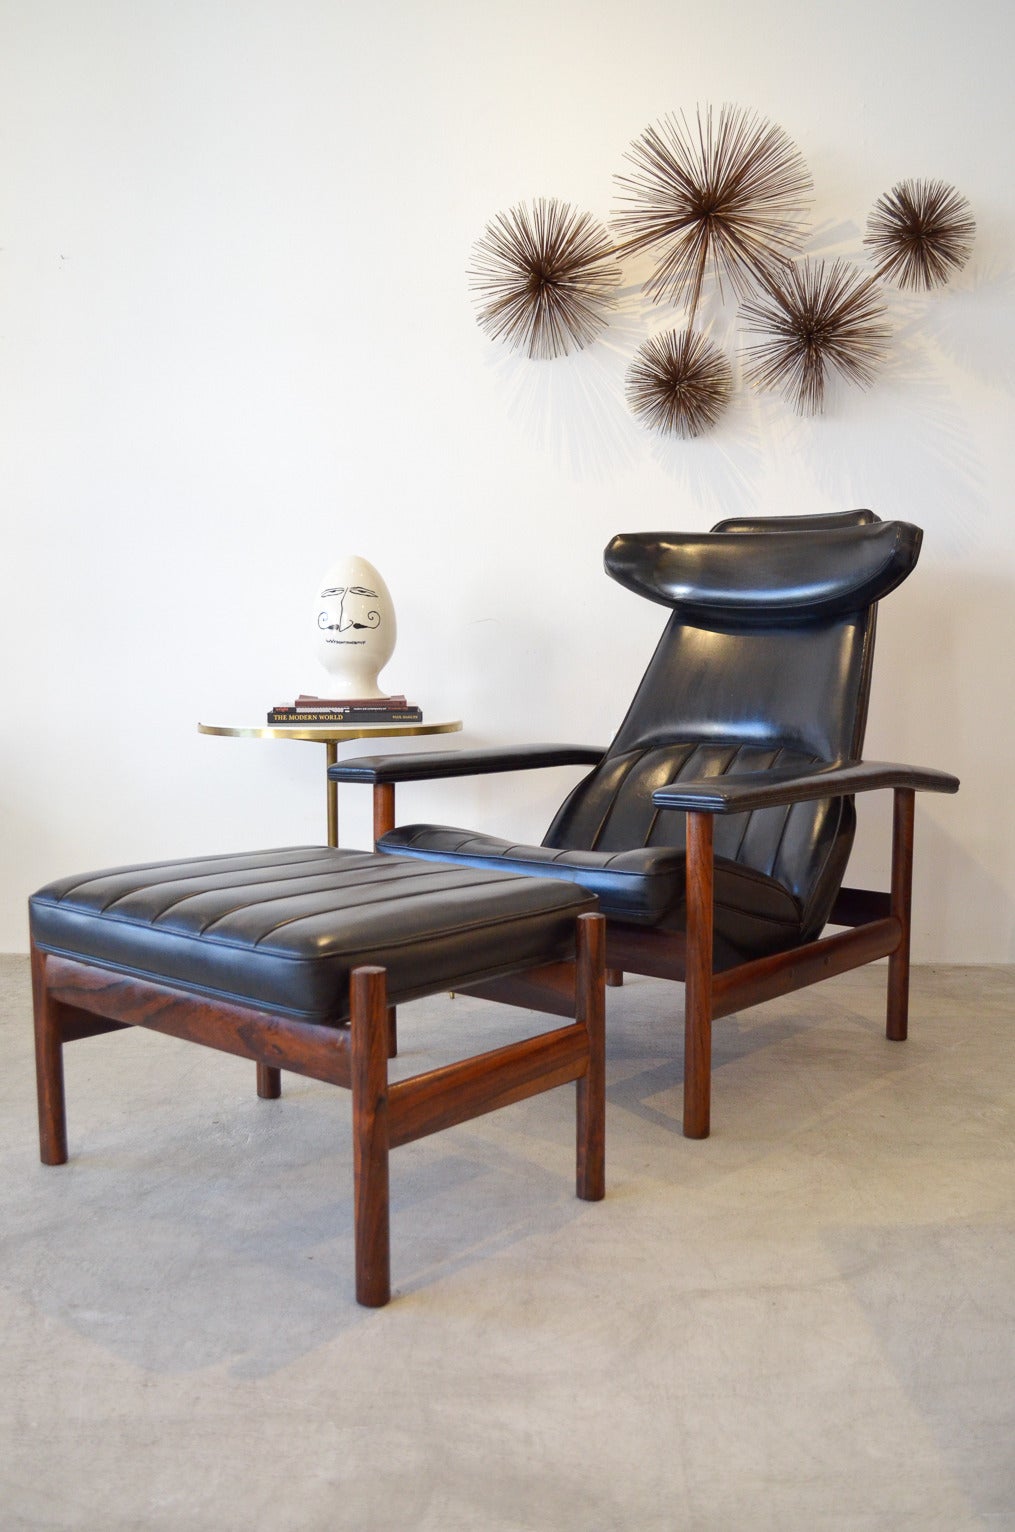 Rare rosewood lounge chair and ottoman by Sven Ivar Dysthe for Dokka Mobler of Norway. Original upholstery with channel stitching on ottoman and back of chair, rosewood frame and nice brass detailing on back and frame.

Excellent vintage